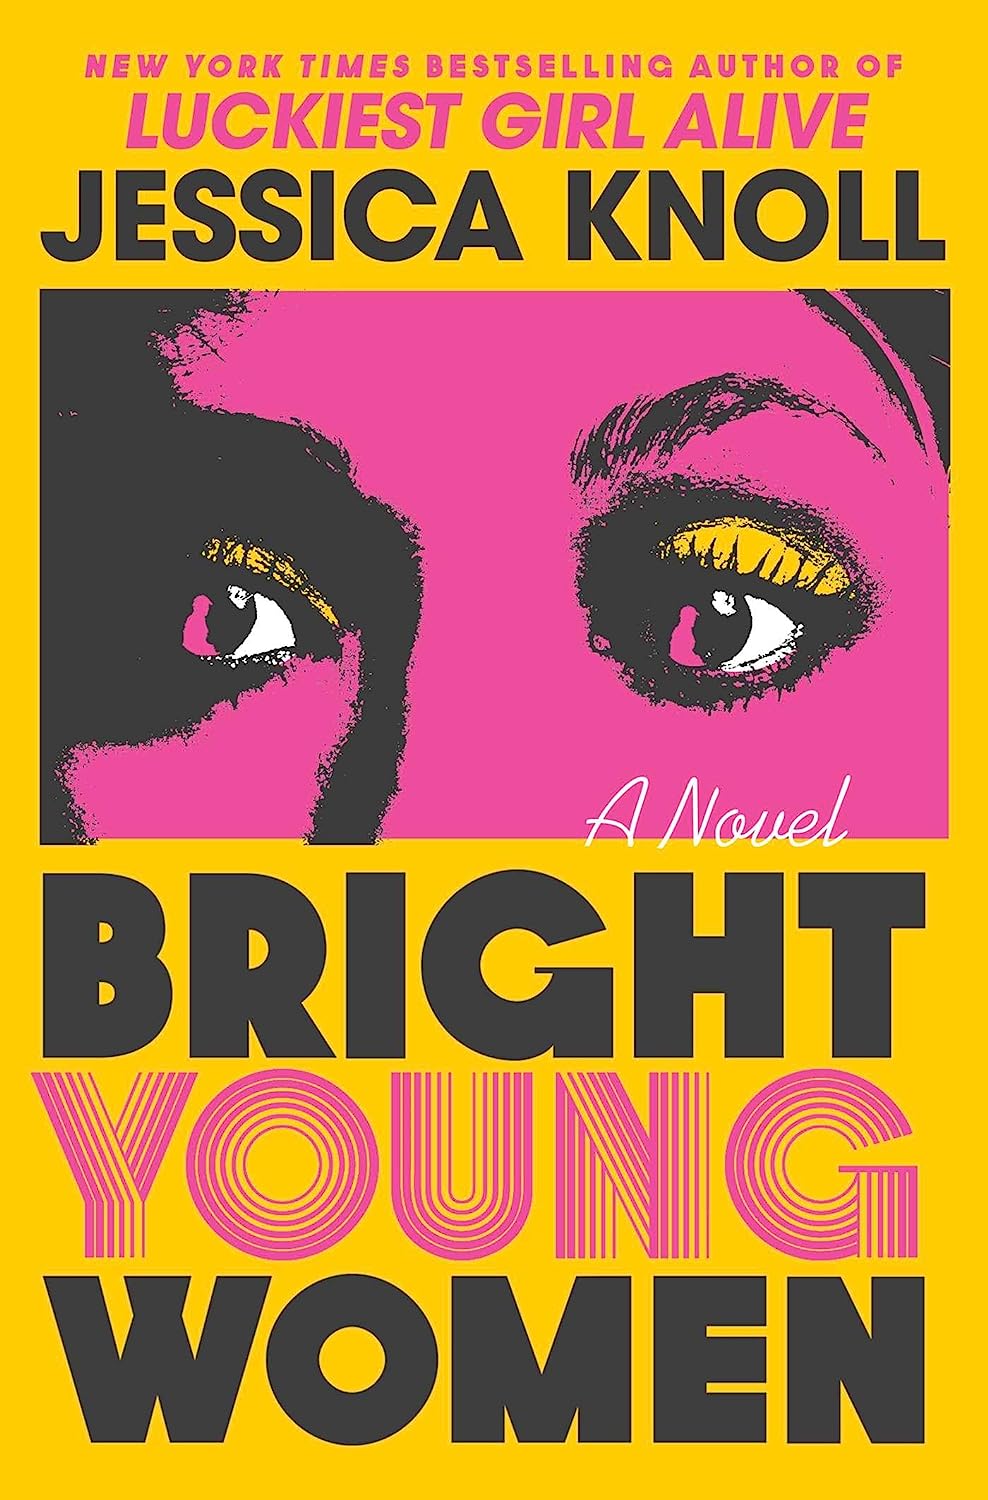 Image for "Bright Young Women"